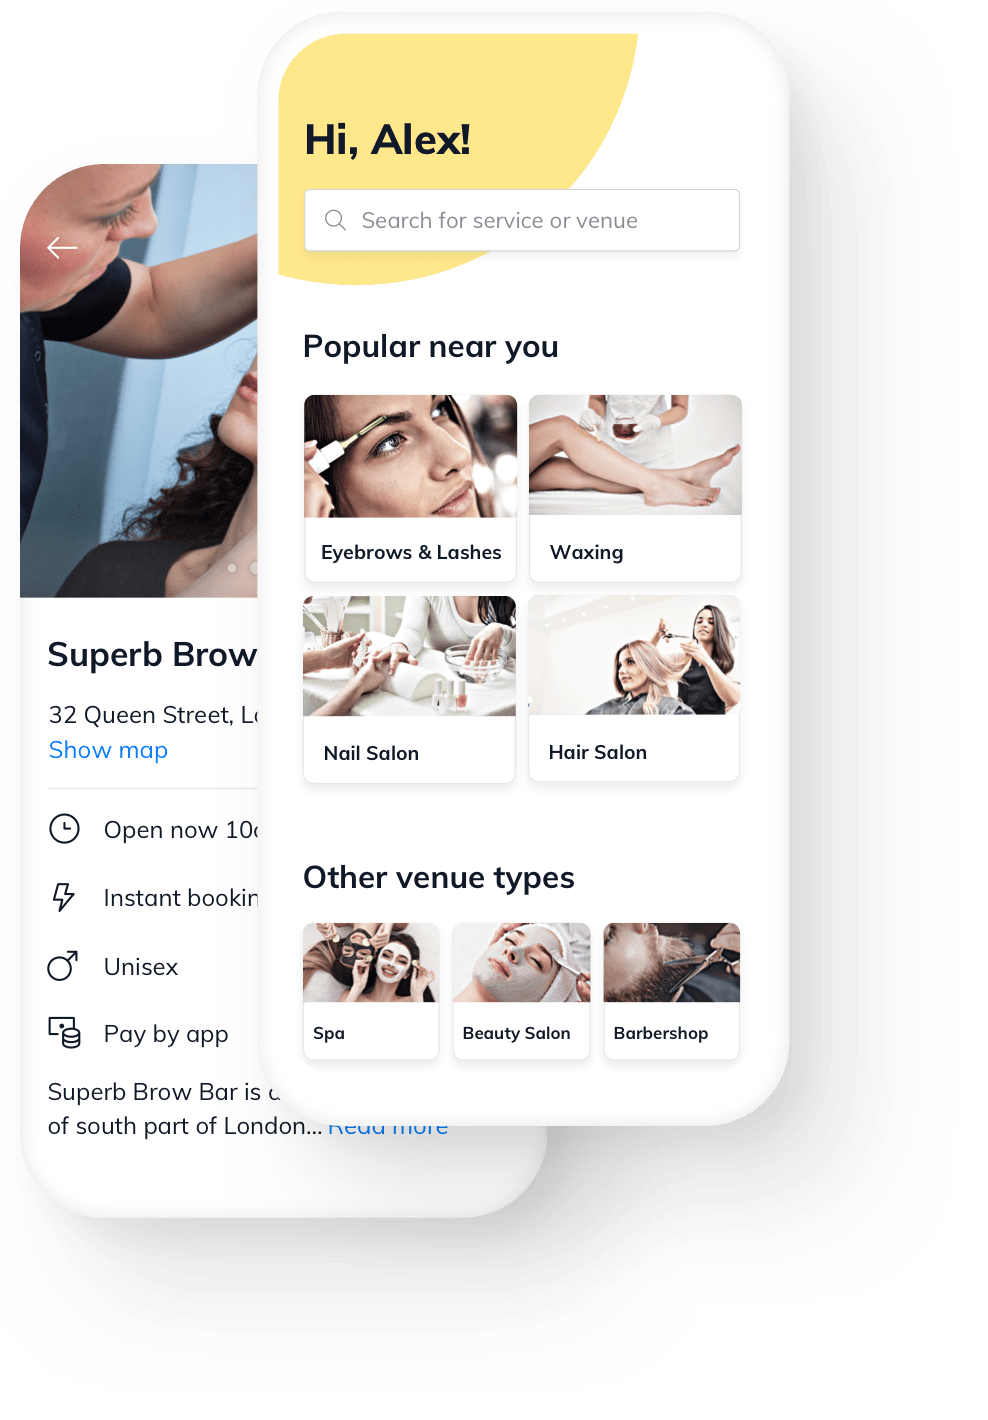 Fresha is the top-rated salon software allowing you to enhance your salon's online presence with powerful marketing and promotional tools, designed to attract new clients and strengthen relationships with existing customers.